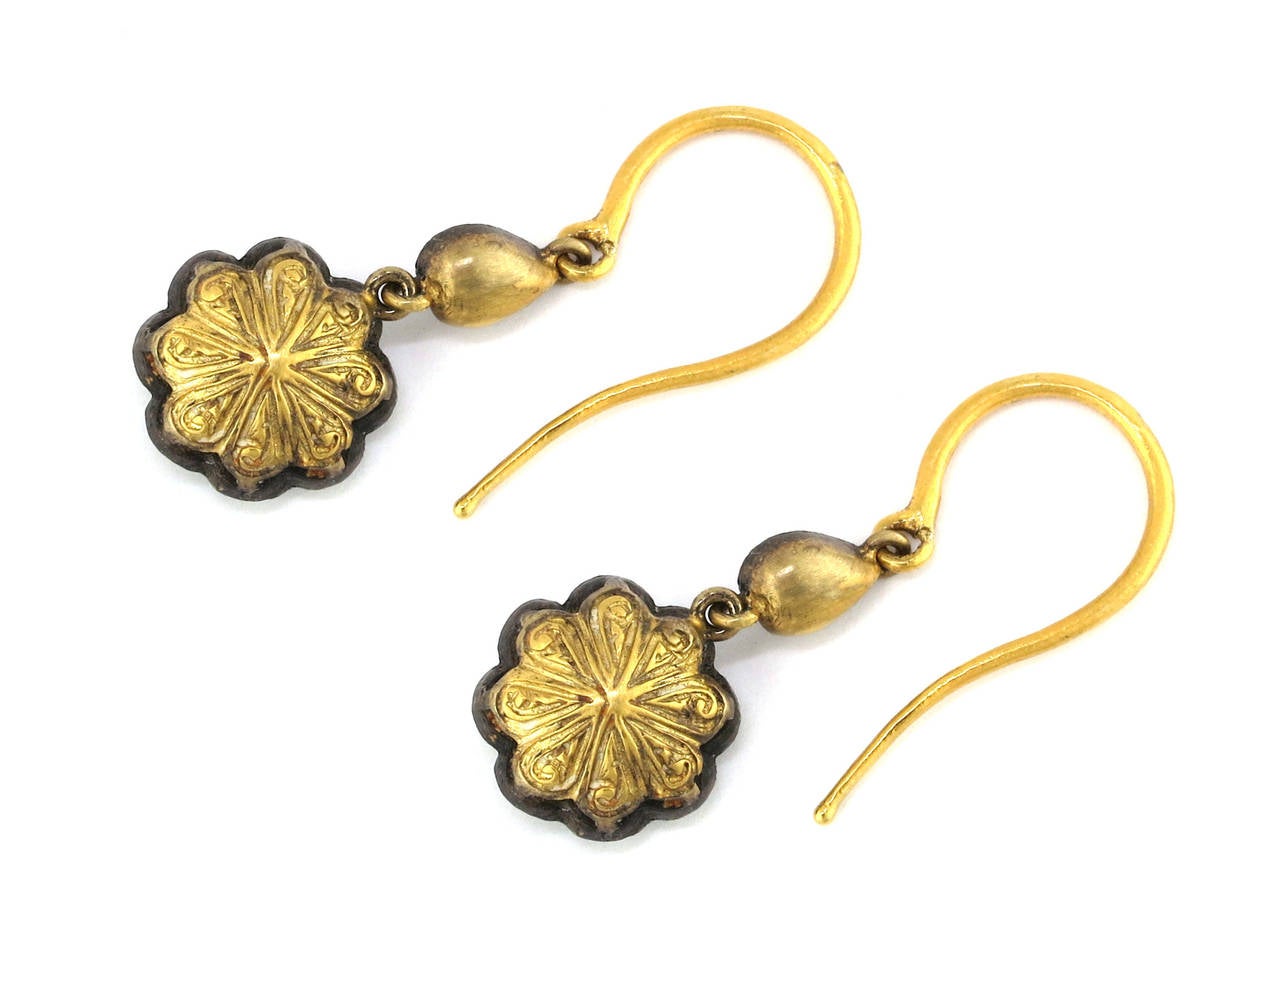 18 Karat Yellow Gold Dangle Earrings with 1.08 CT Rose Cut Diamonds, accented with an Antique Silver Patina Finish. These earrings hang at about 1.25 inches in length and are 0.5 inches wide. 

Inspired by the Edwardian Era, a time when fine